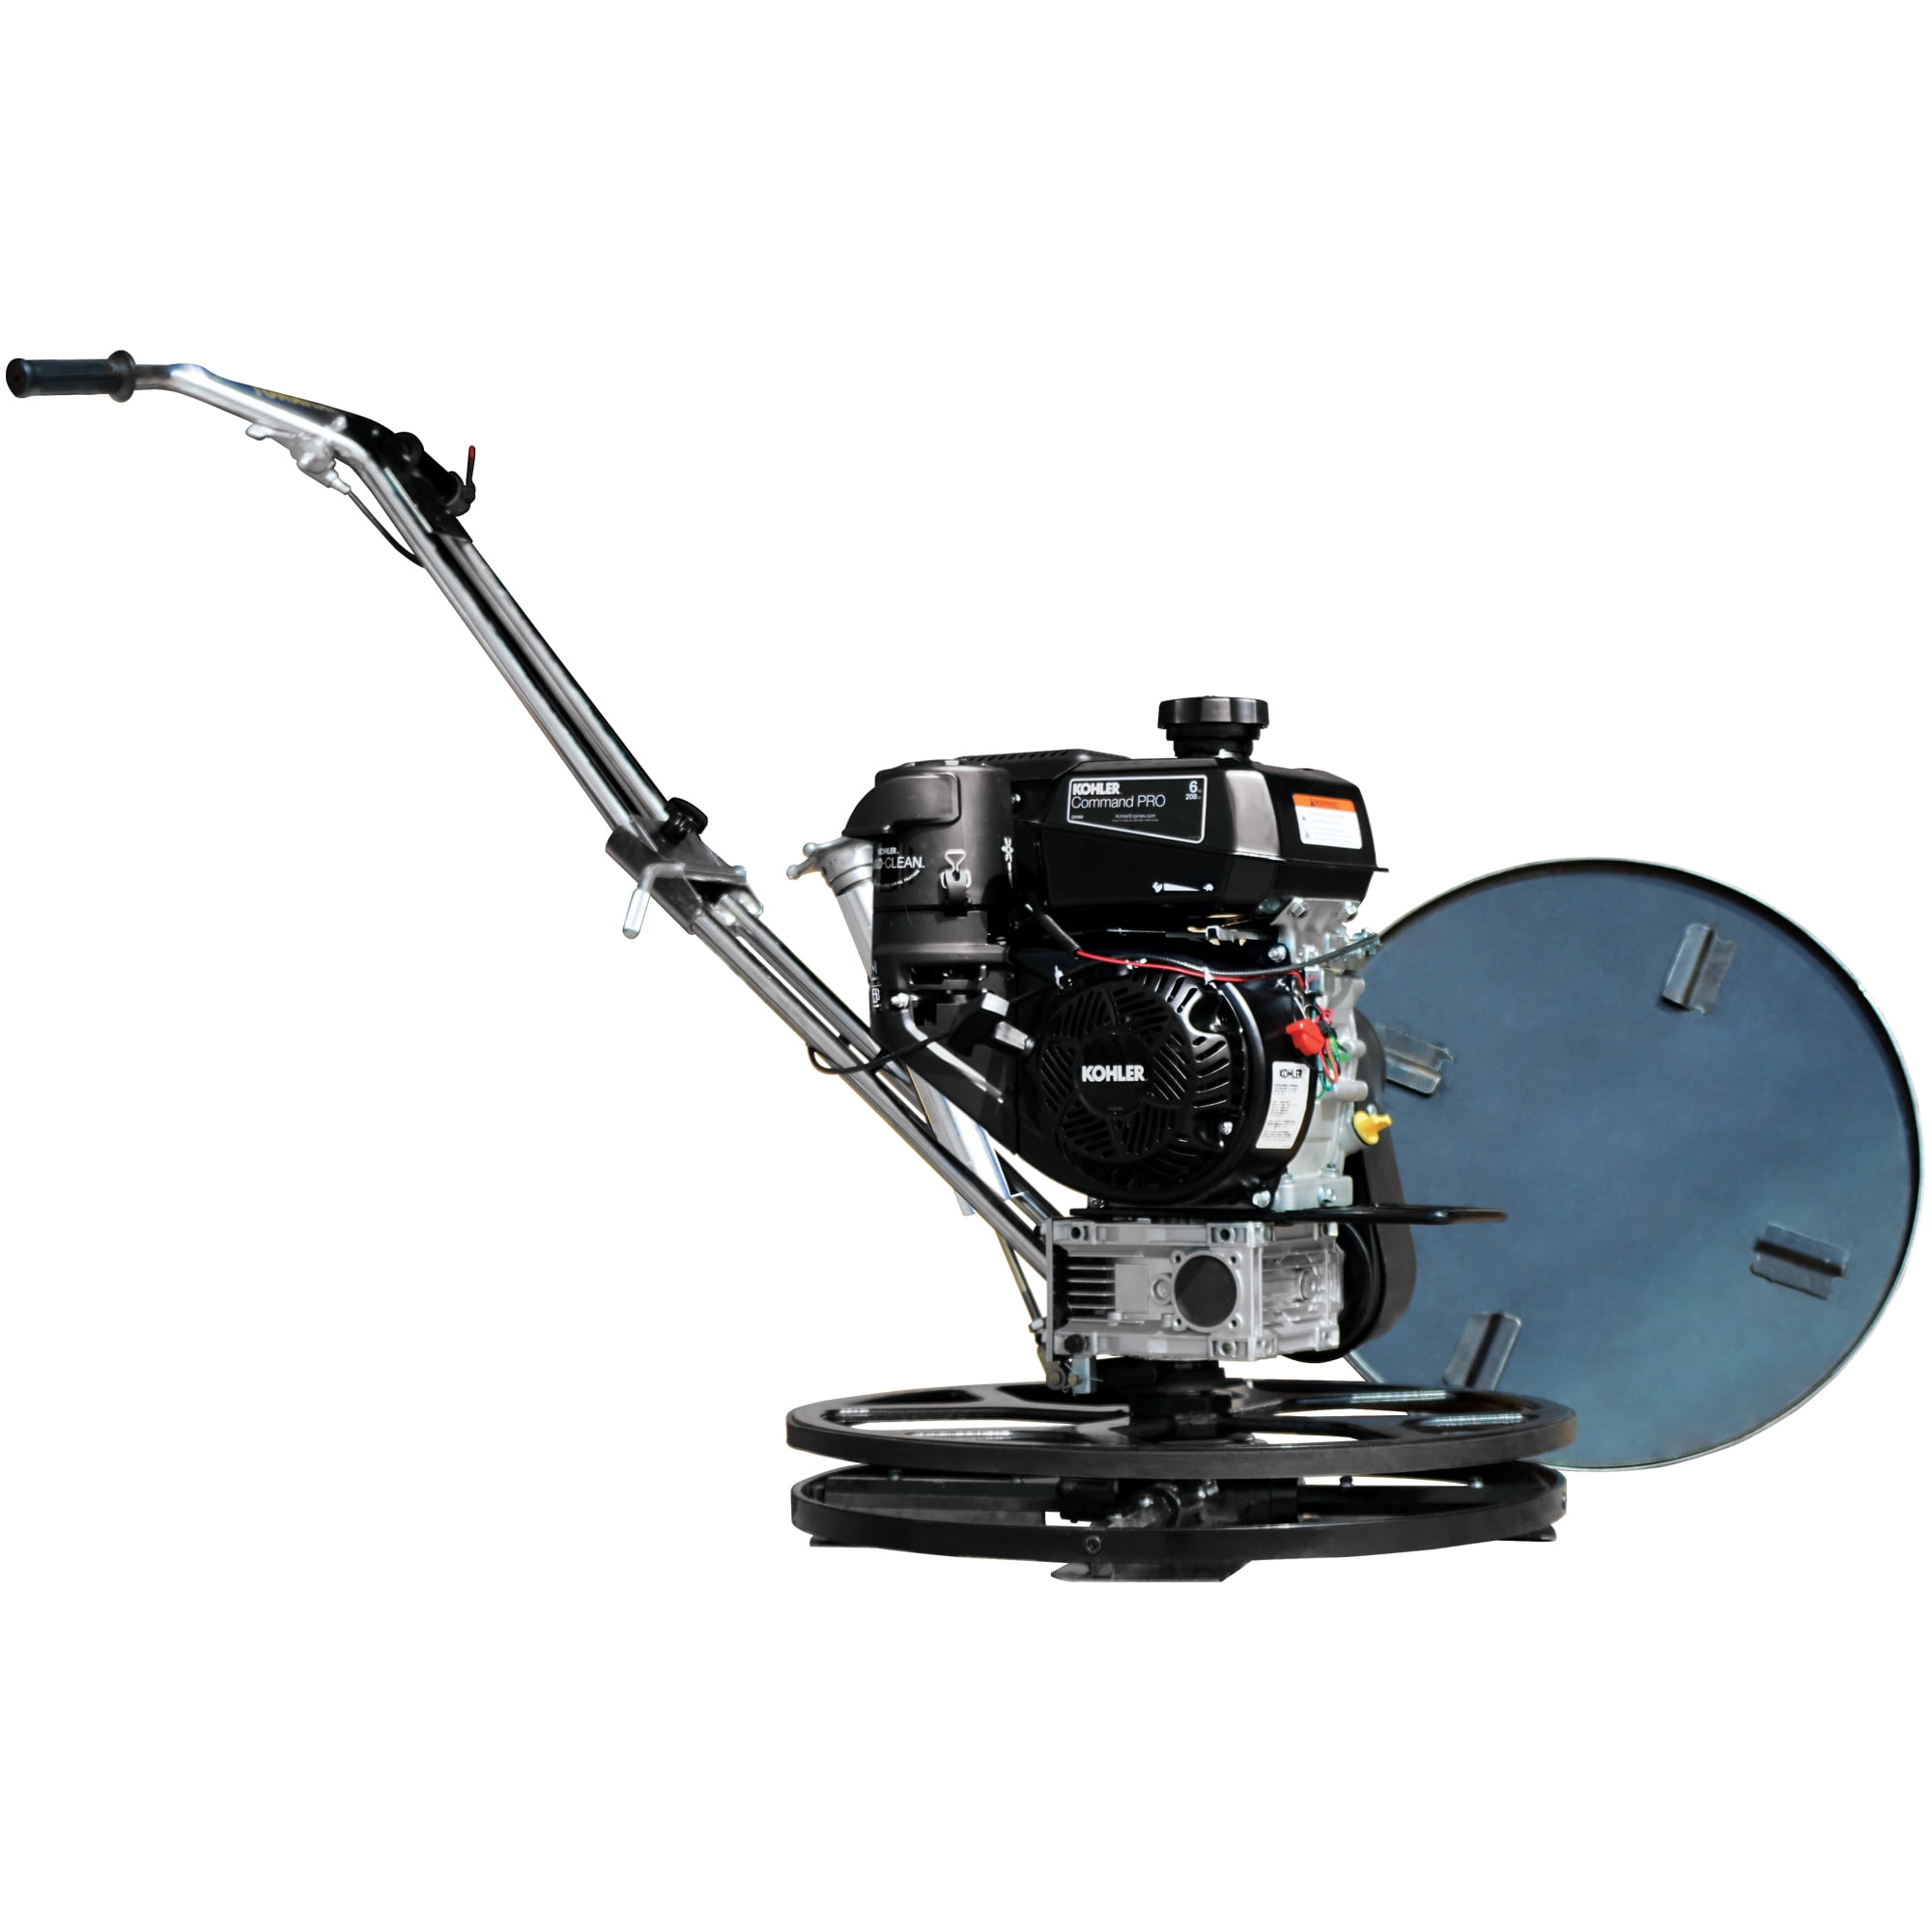 TOMAHAWK 24" Power Trowel Edger Walk Behind Gas Power 6 HP Kohler Engine with Blades 24" Float Pan for Concrete Finishing Cement Floor Surface